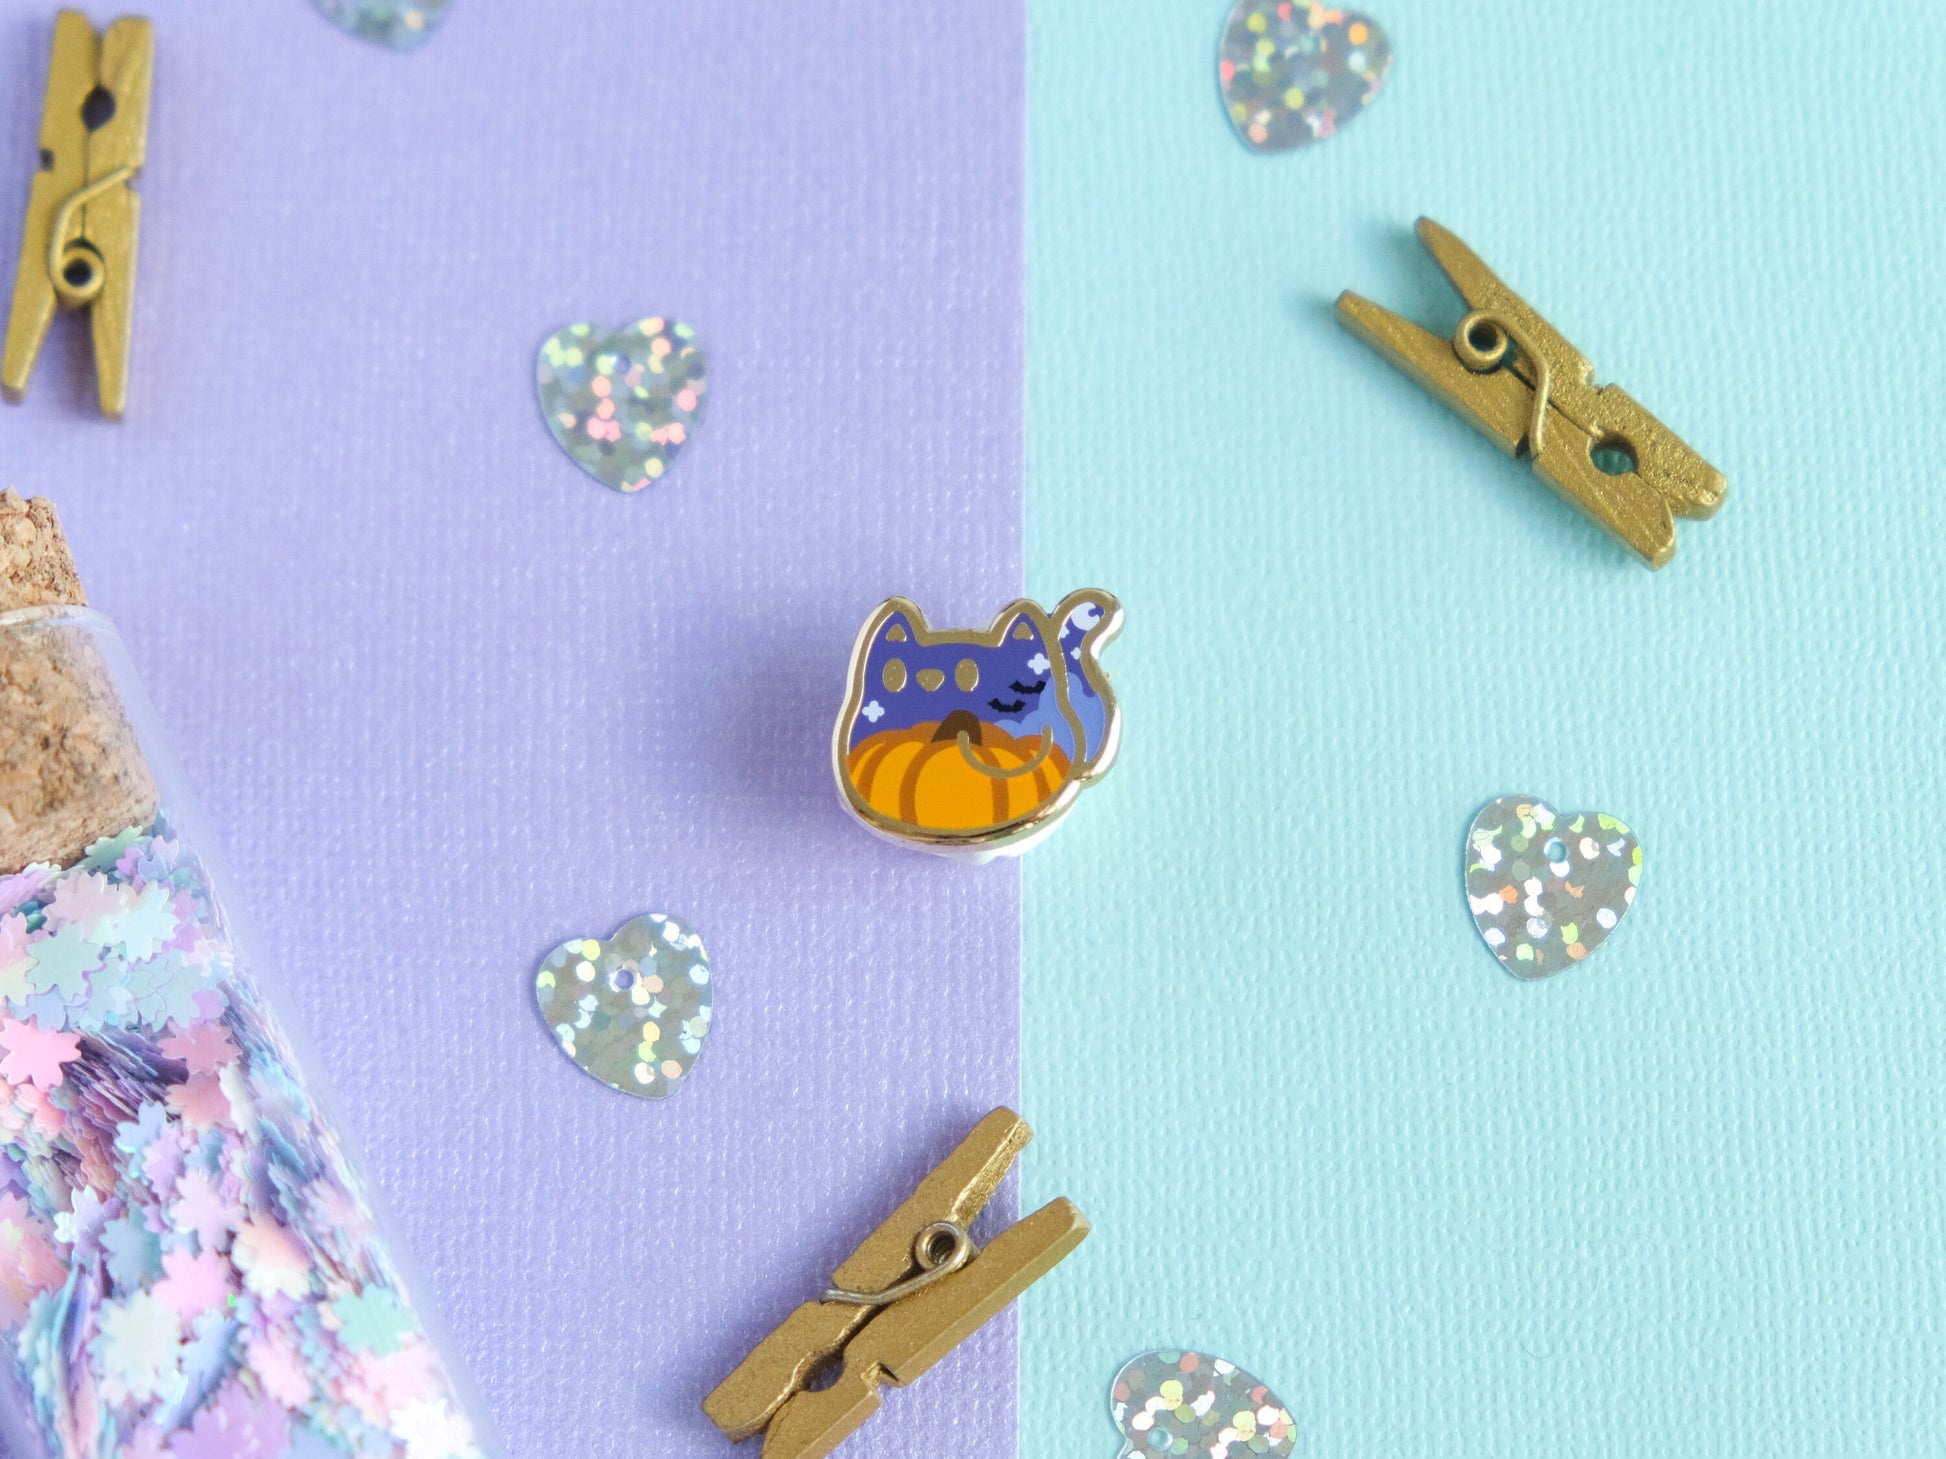 LIMITED EDITION - Mini Hard Enamel Pin Cute Cat with pumpkin for Halloween perfect as board filler pin